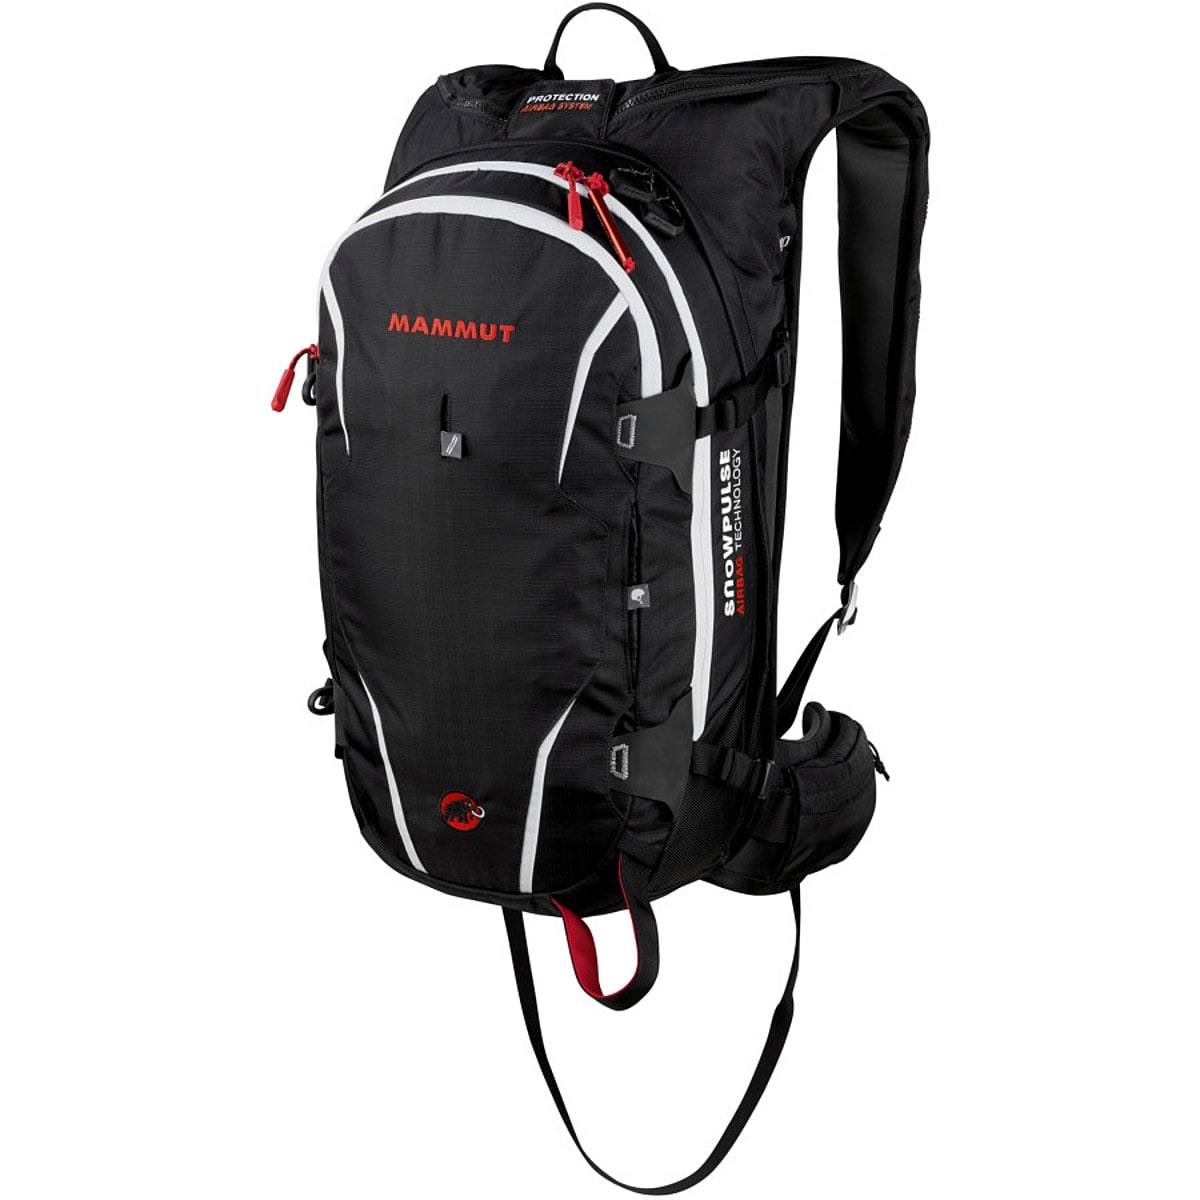 Mammut Ride Protection Backpack - 1342-1831cu in Ski